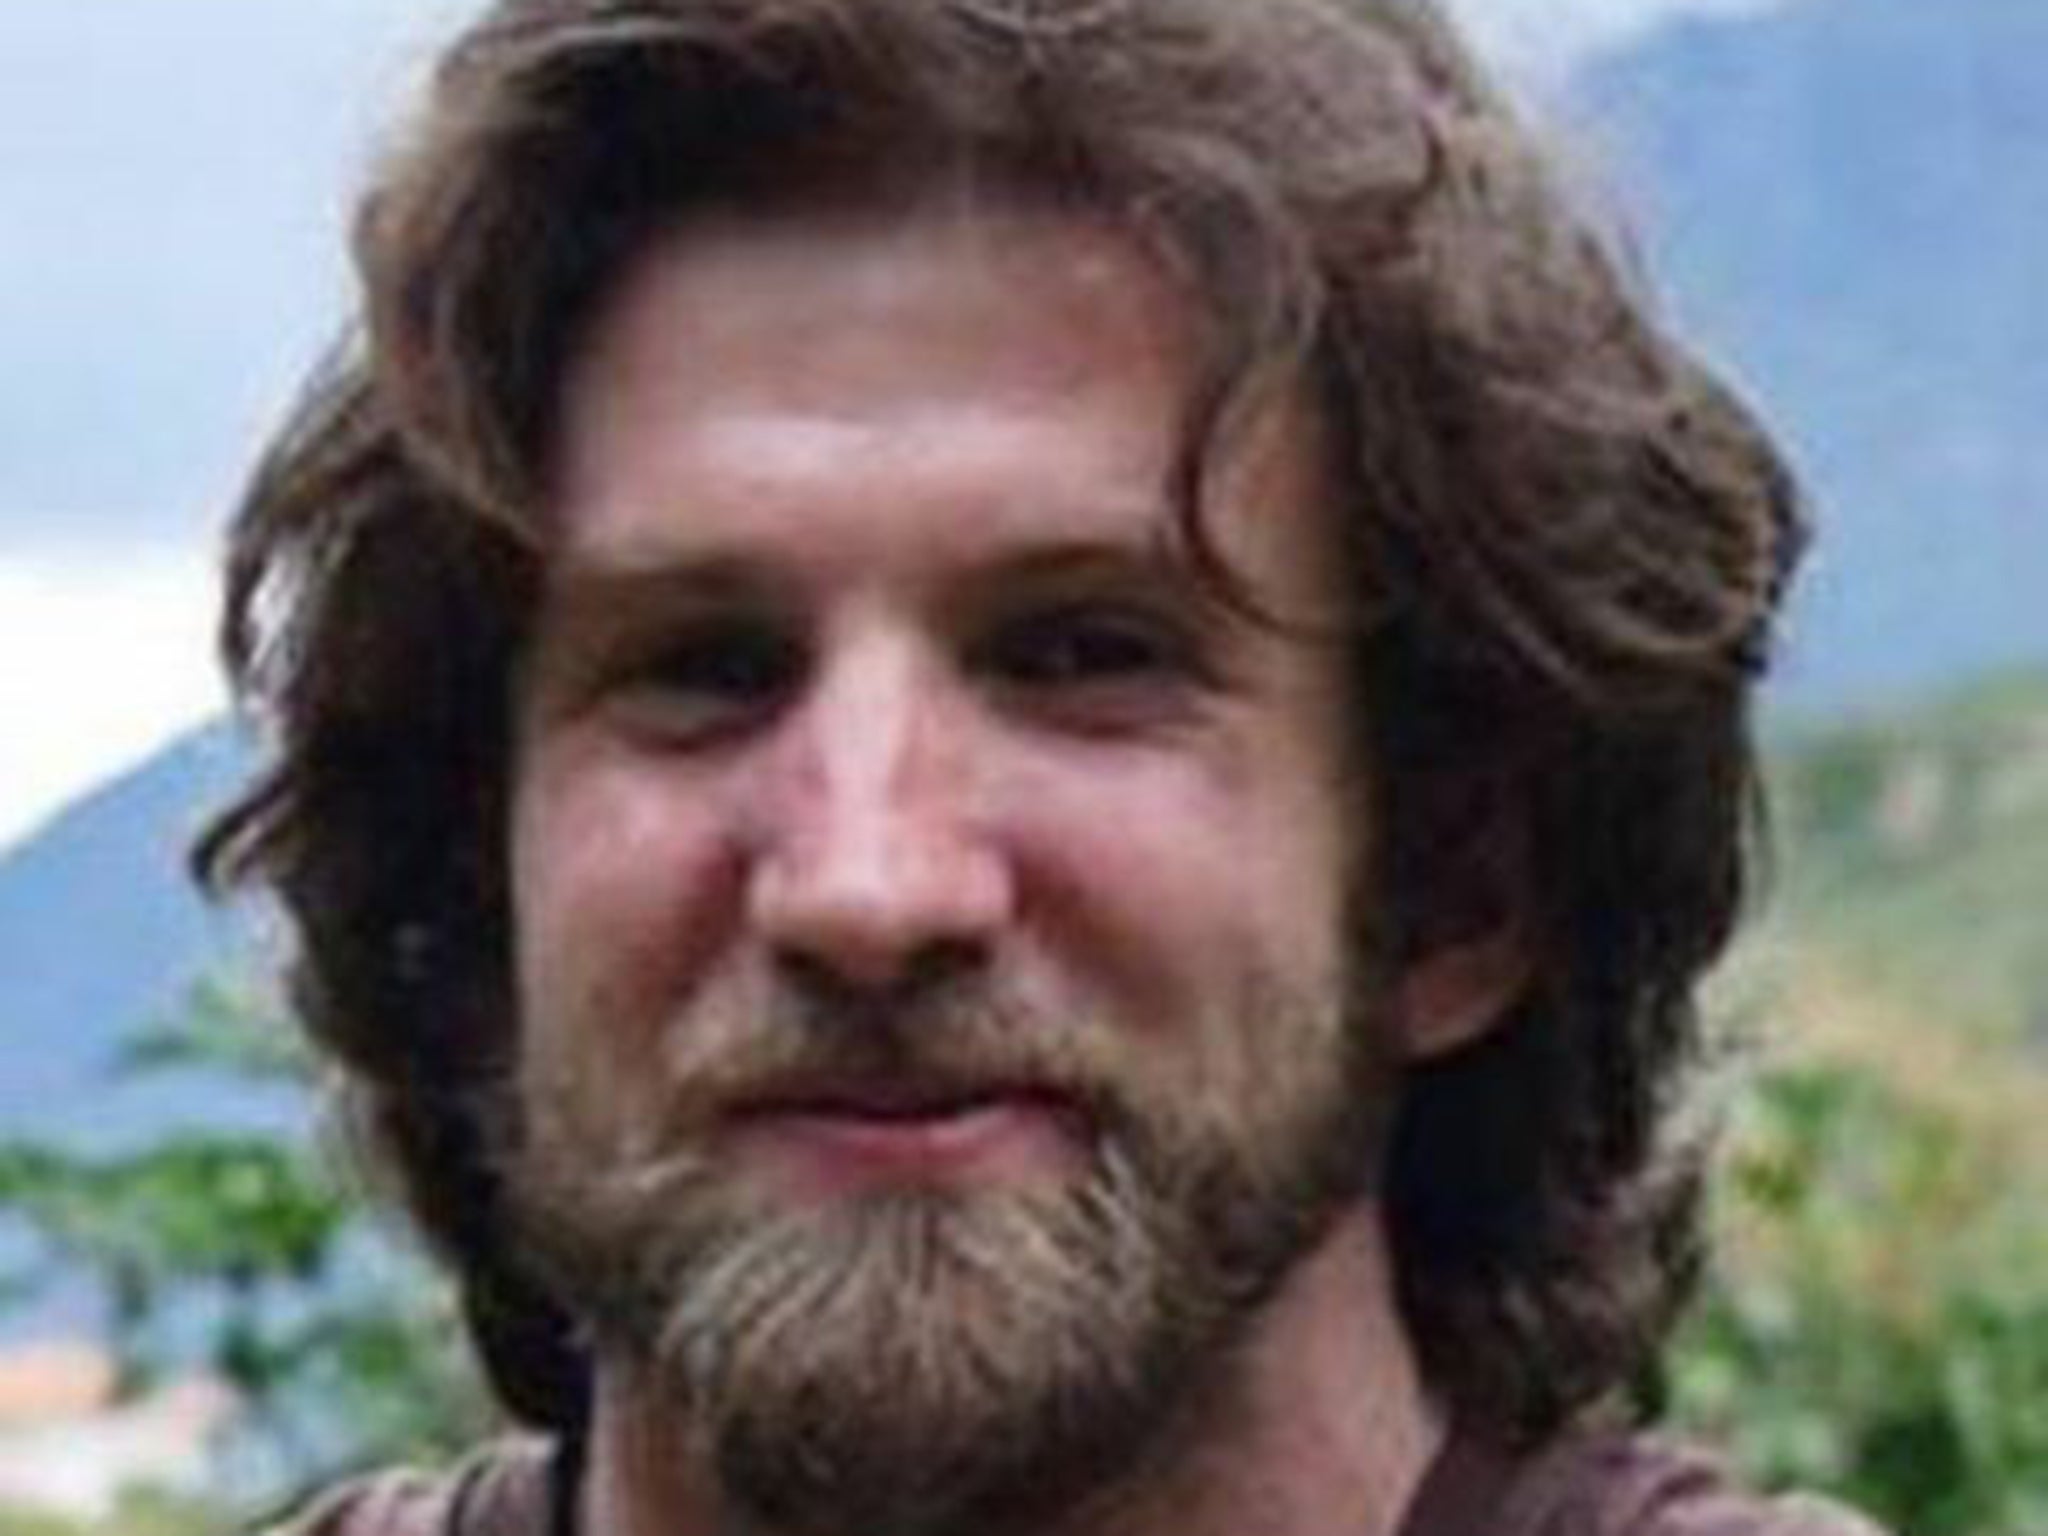 Harry Greaves was missing for two weeks before his body was found in a 40 metre crevice in the Andes Mountains